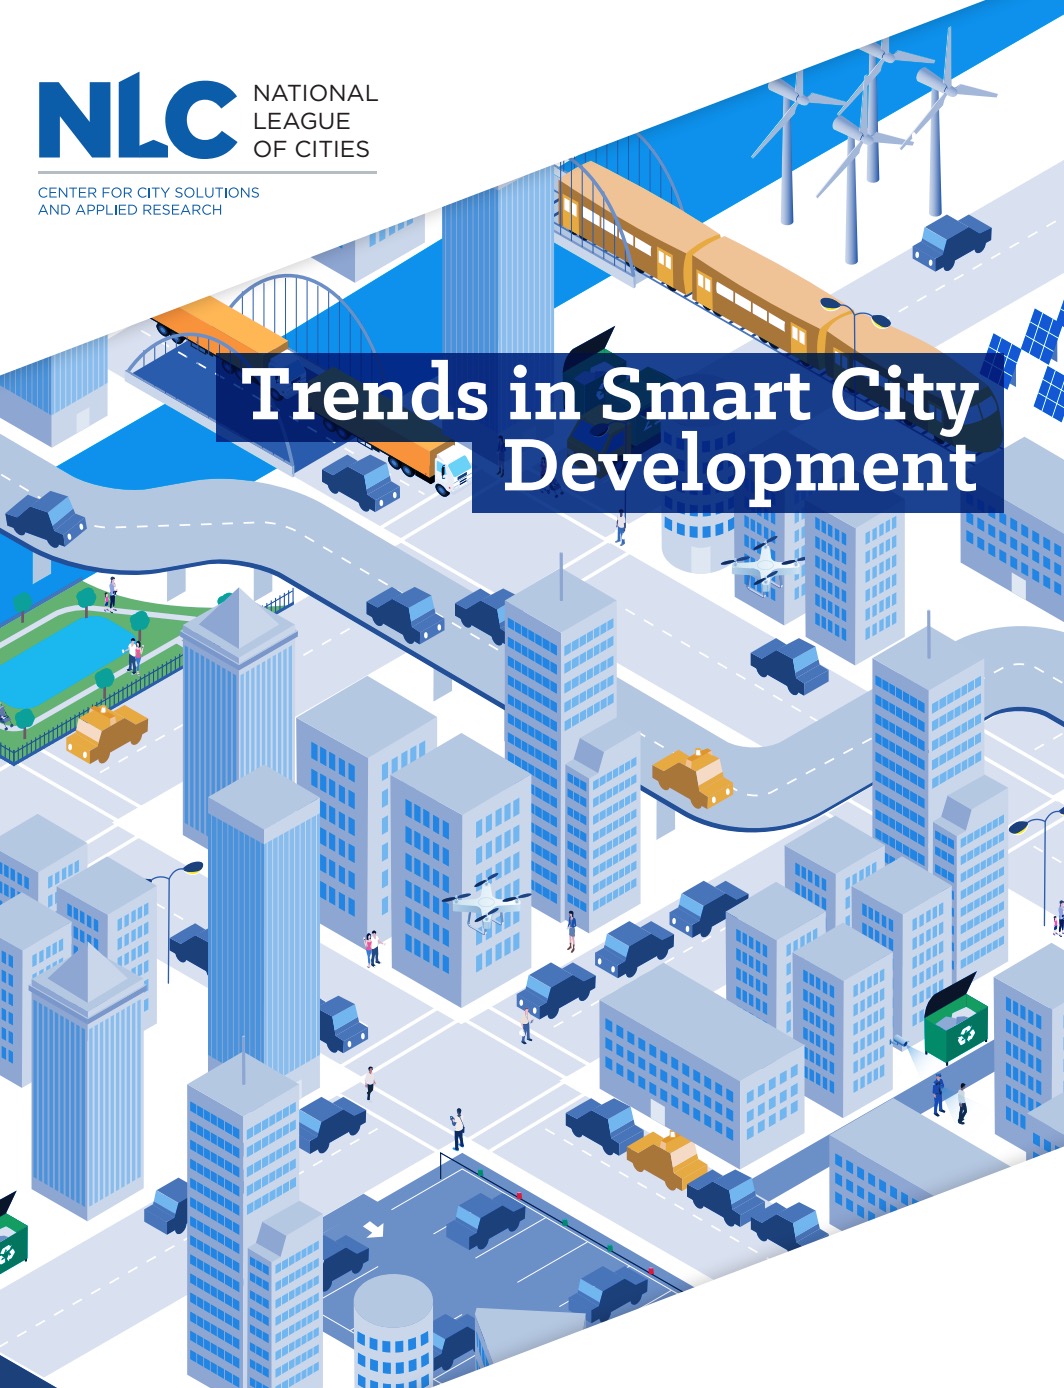 National League of Cities - Trends in Smart City Development